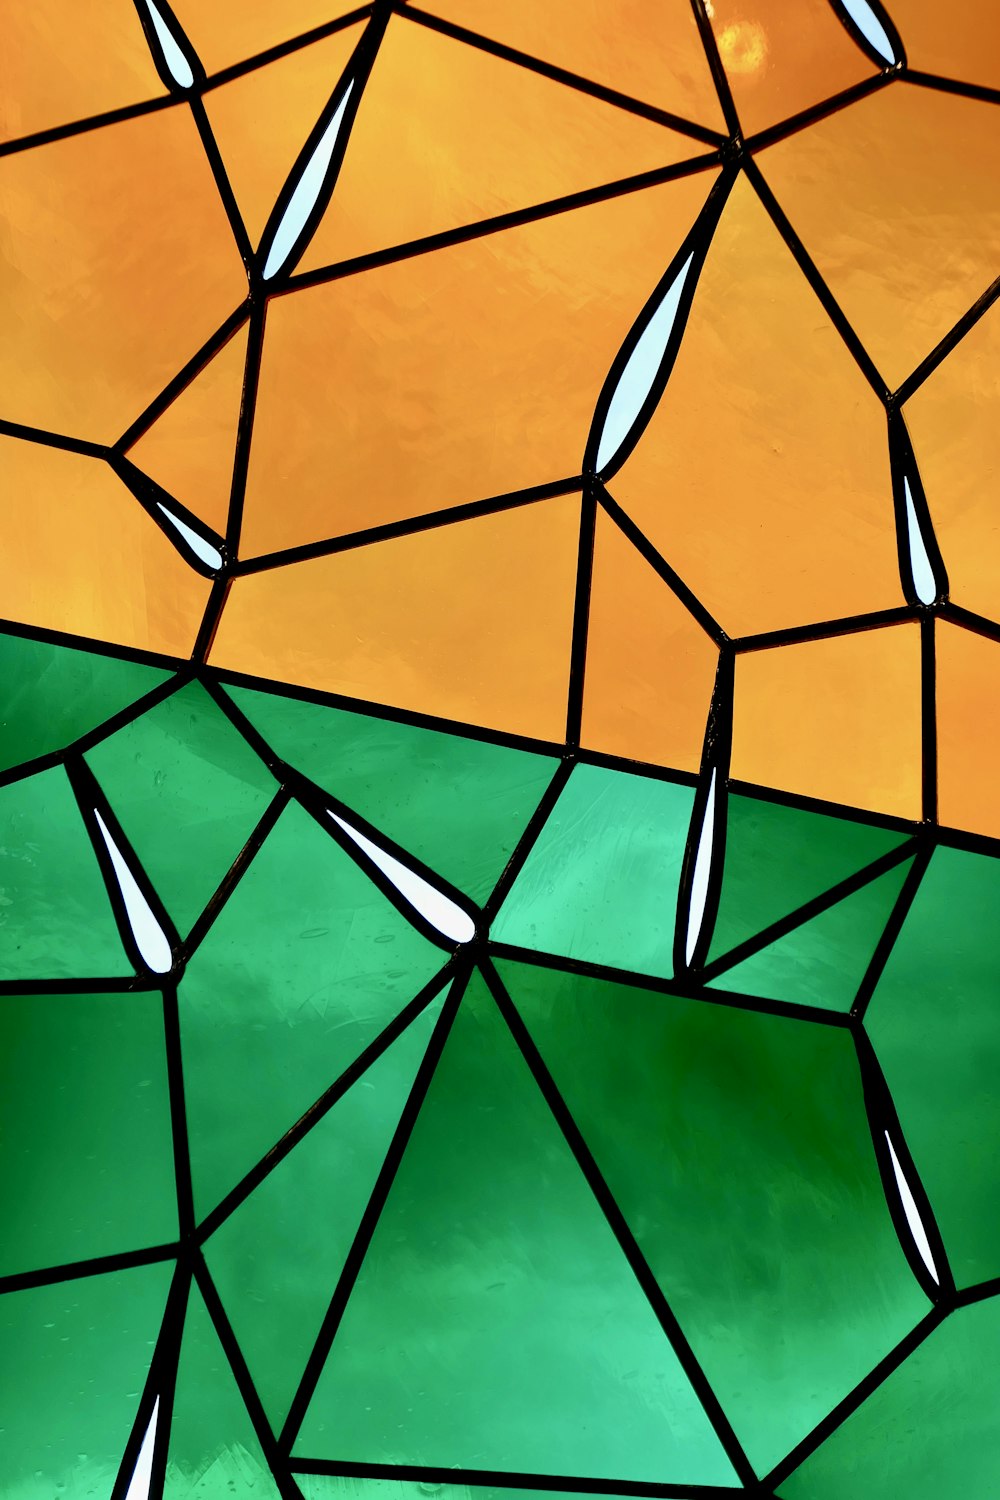 a close up of a stained glass window